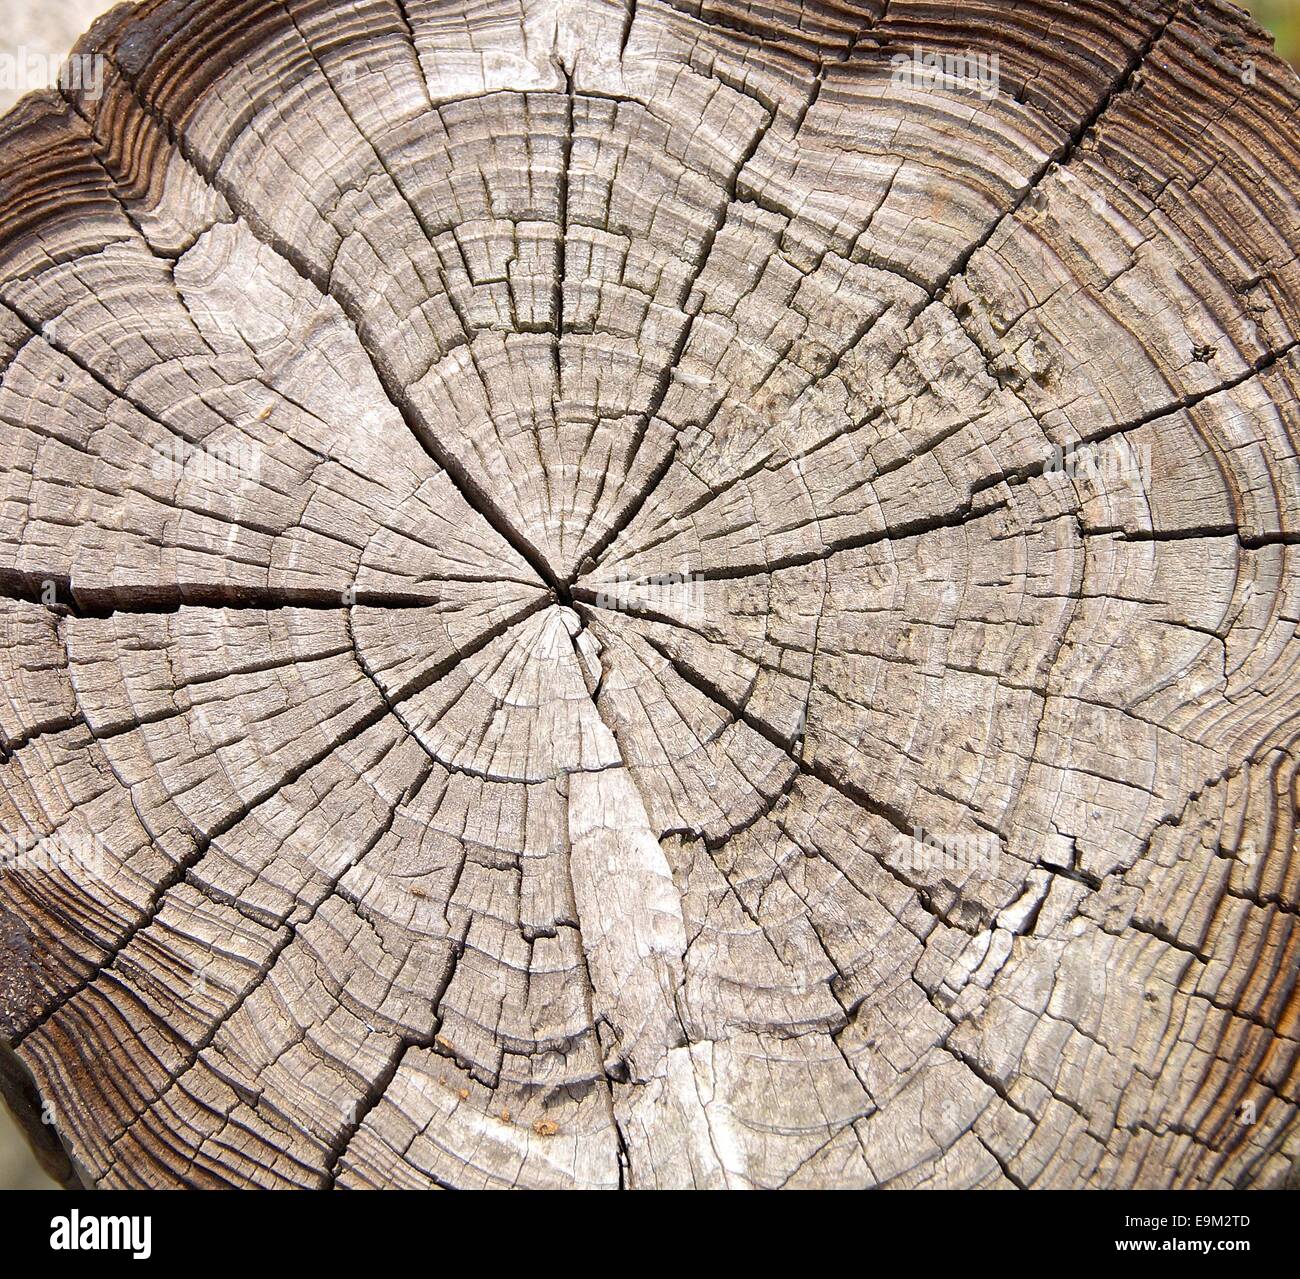 What Tree Rings Can Tell About Forest Fires? - The Good Men Project